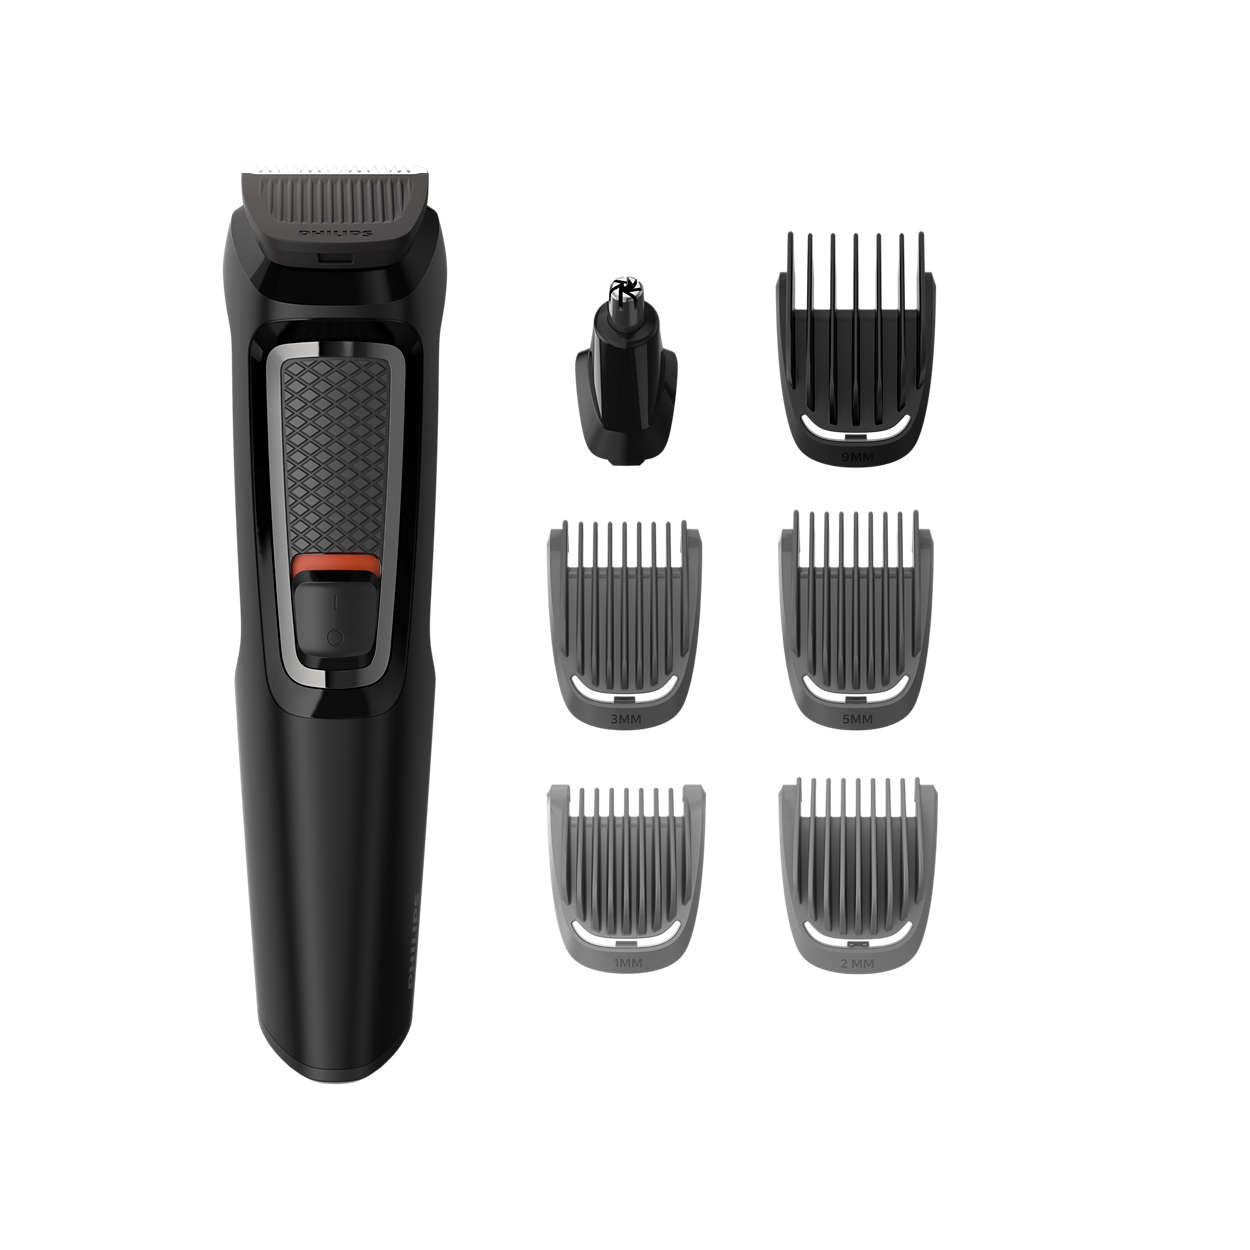 All-in-one trimmer